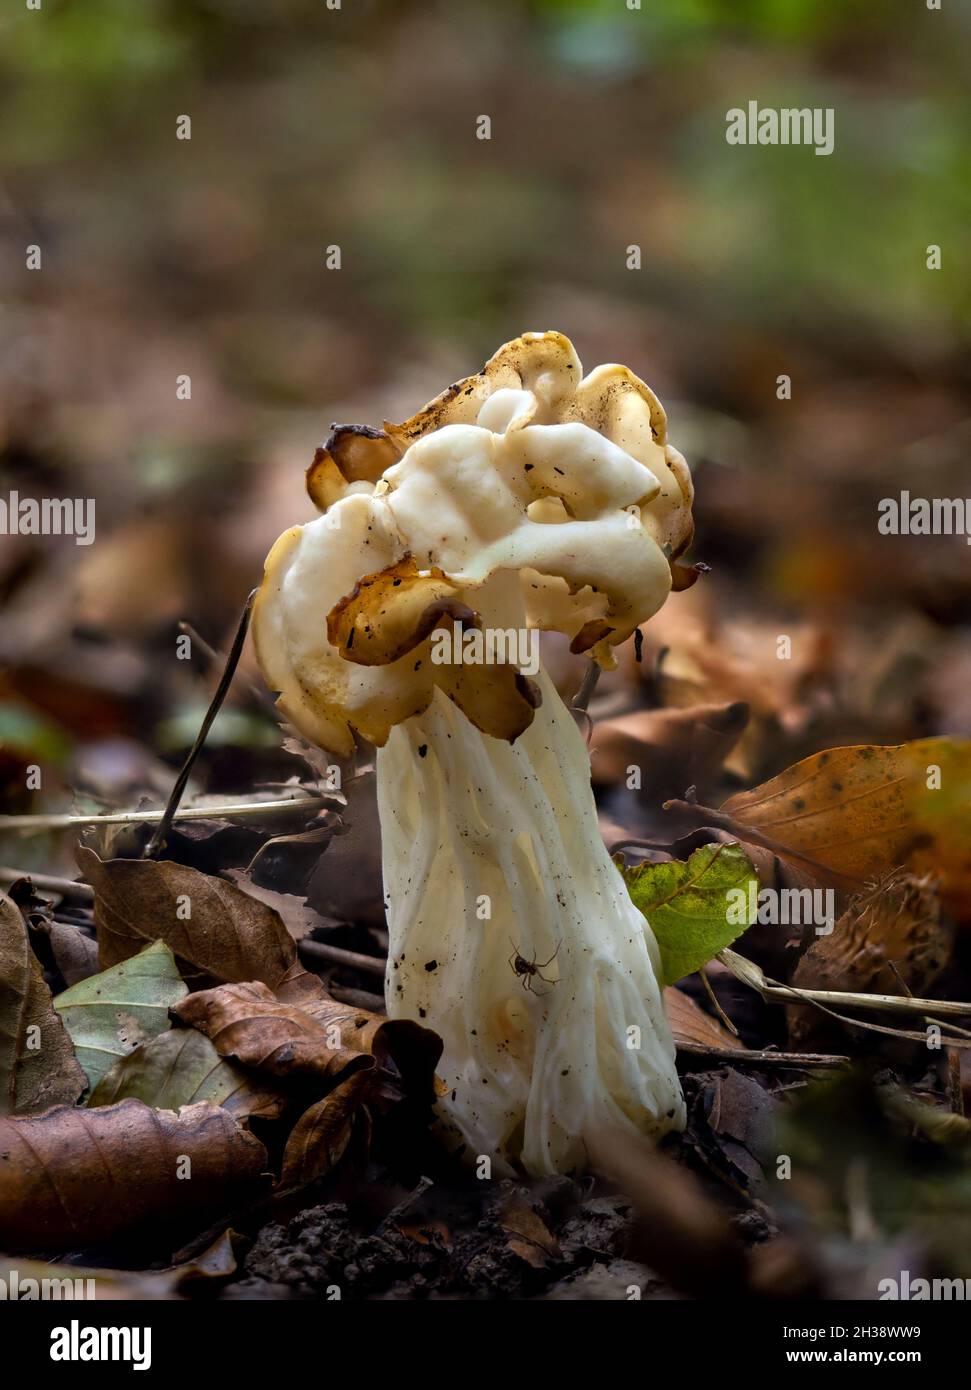 Old White Saddle fungus in Englsih woodland, with spider on stem Stock Photo